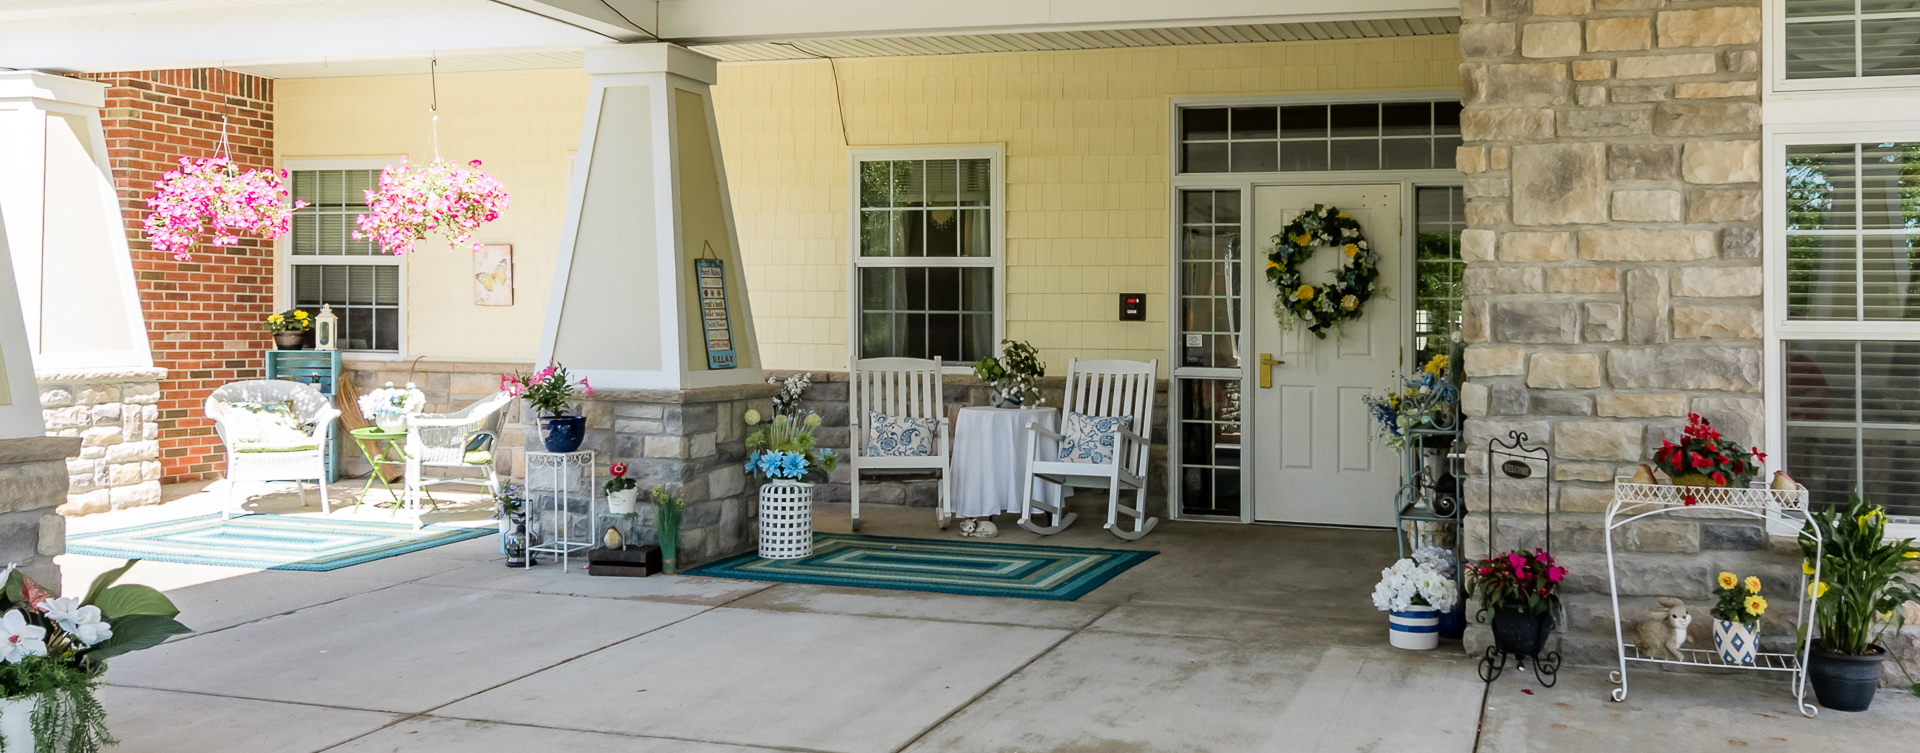 Relax in your favorite chair on the porch at Bickford of Midland